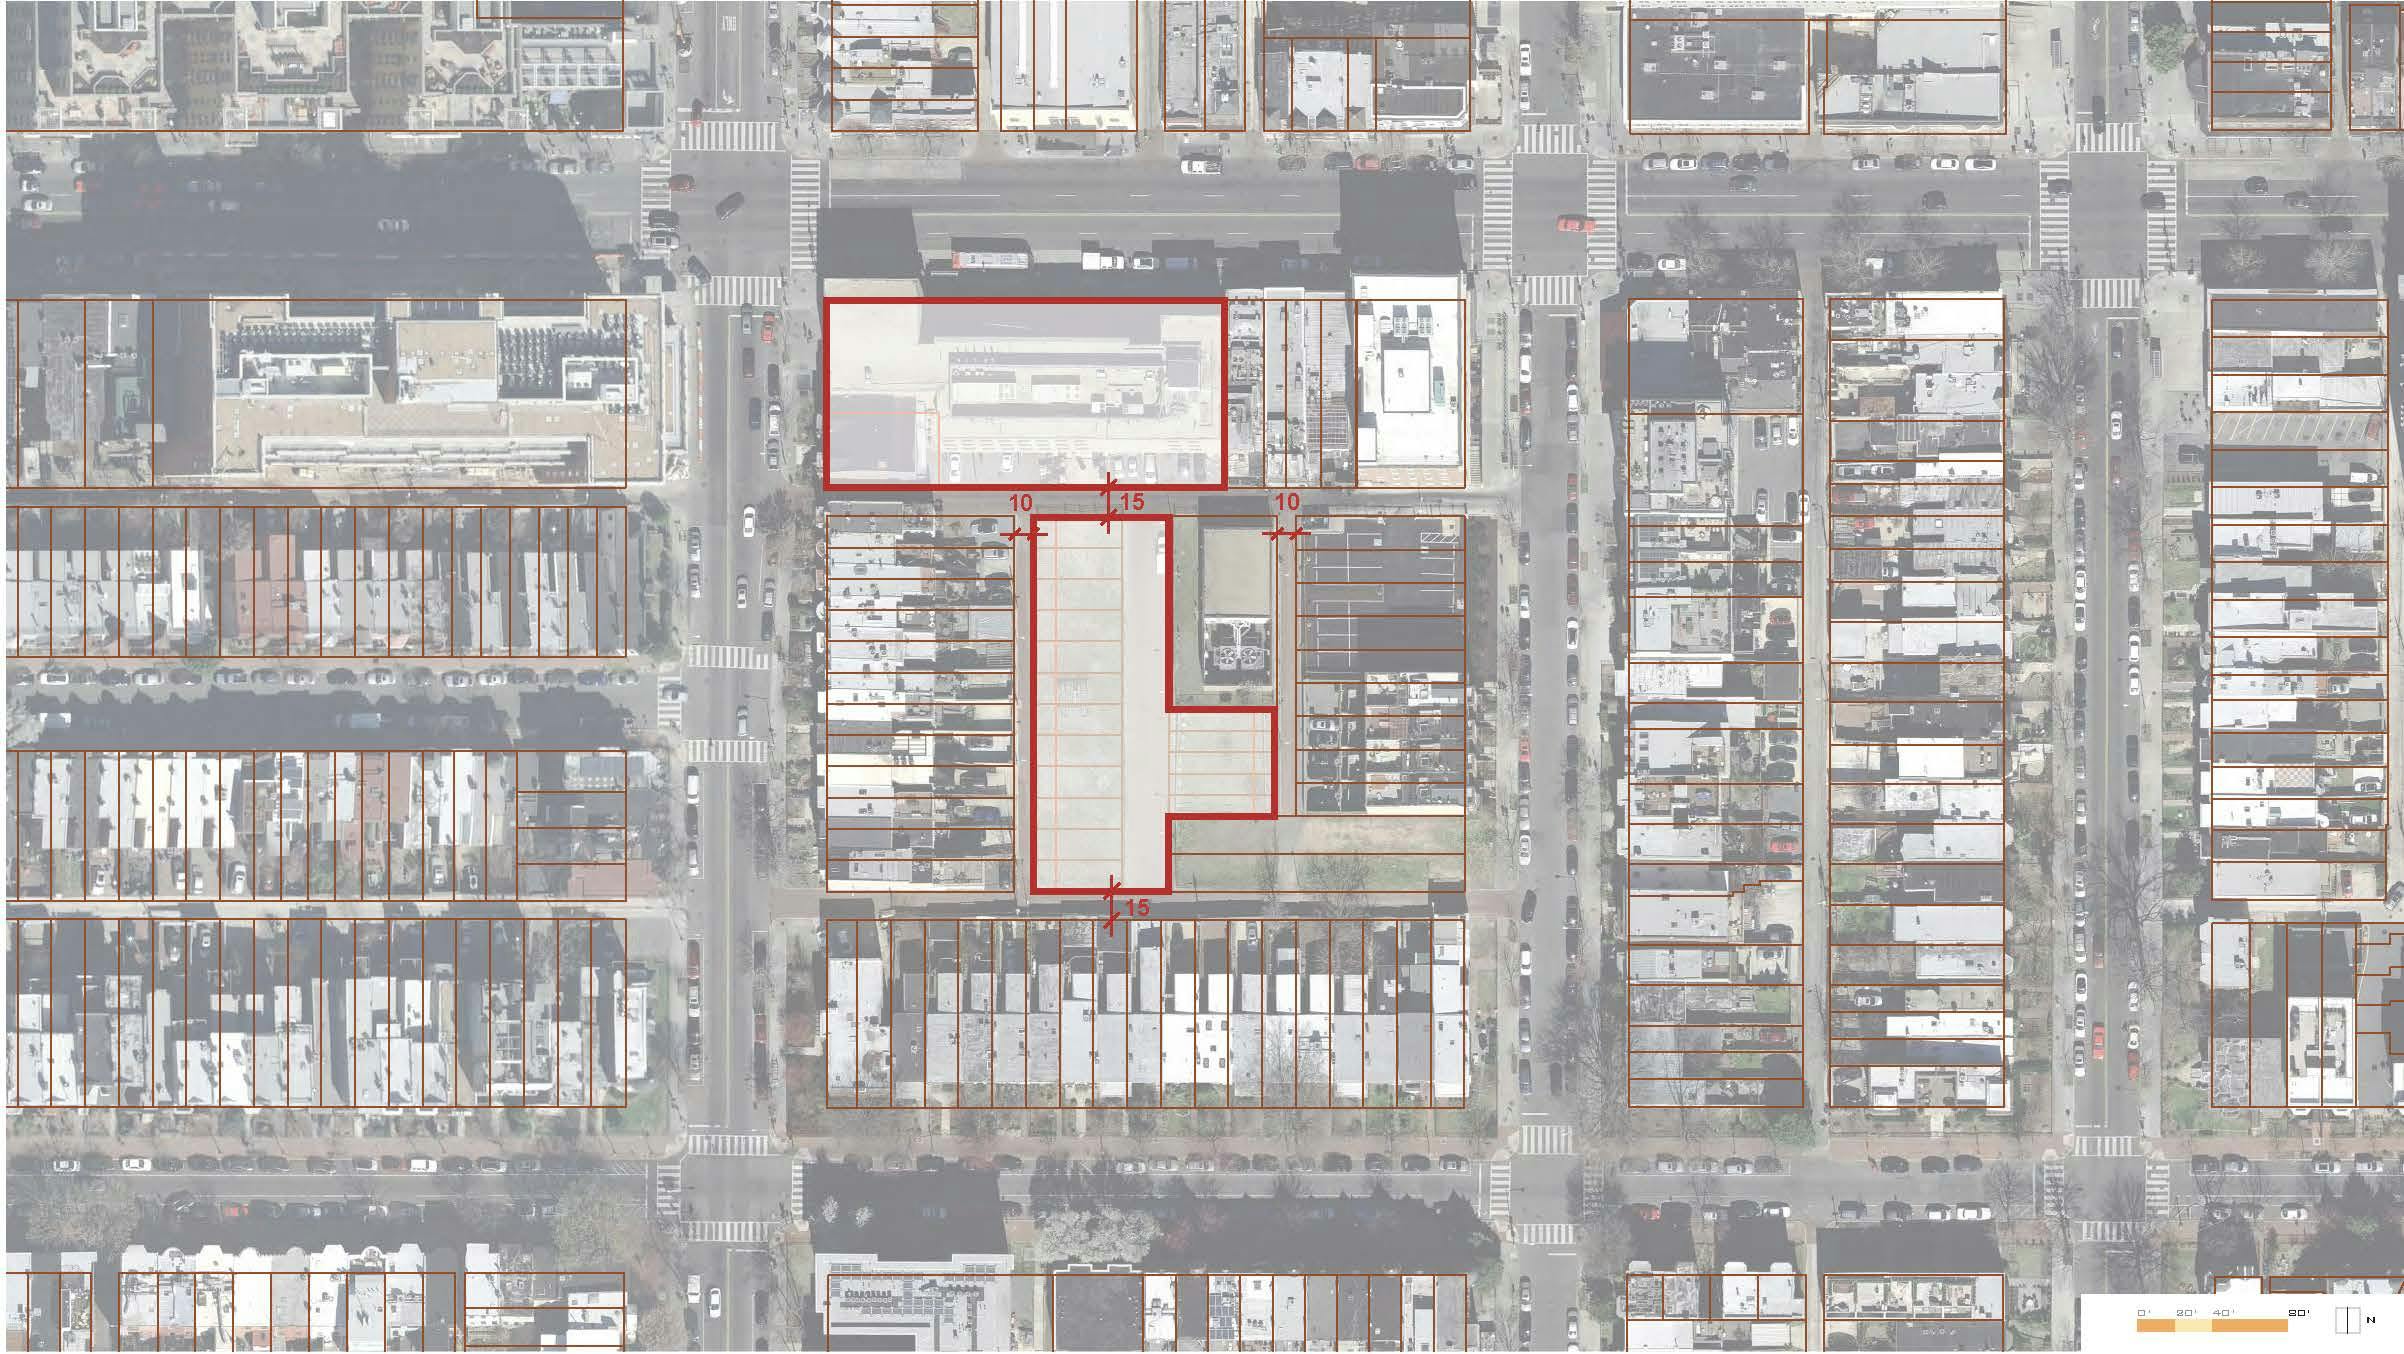 birds-eye view satellite image of project site block with the lot outlined in red.